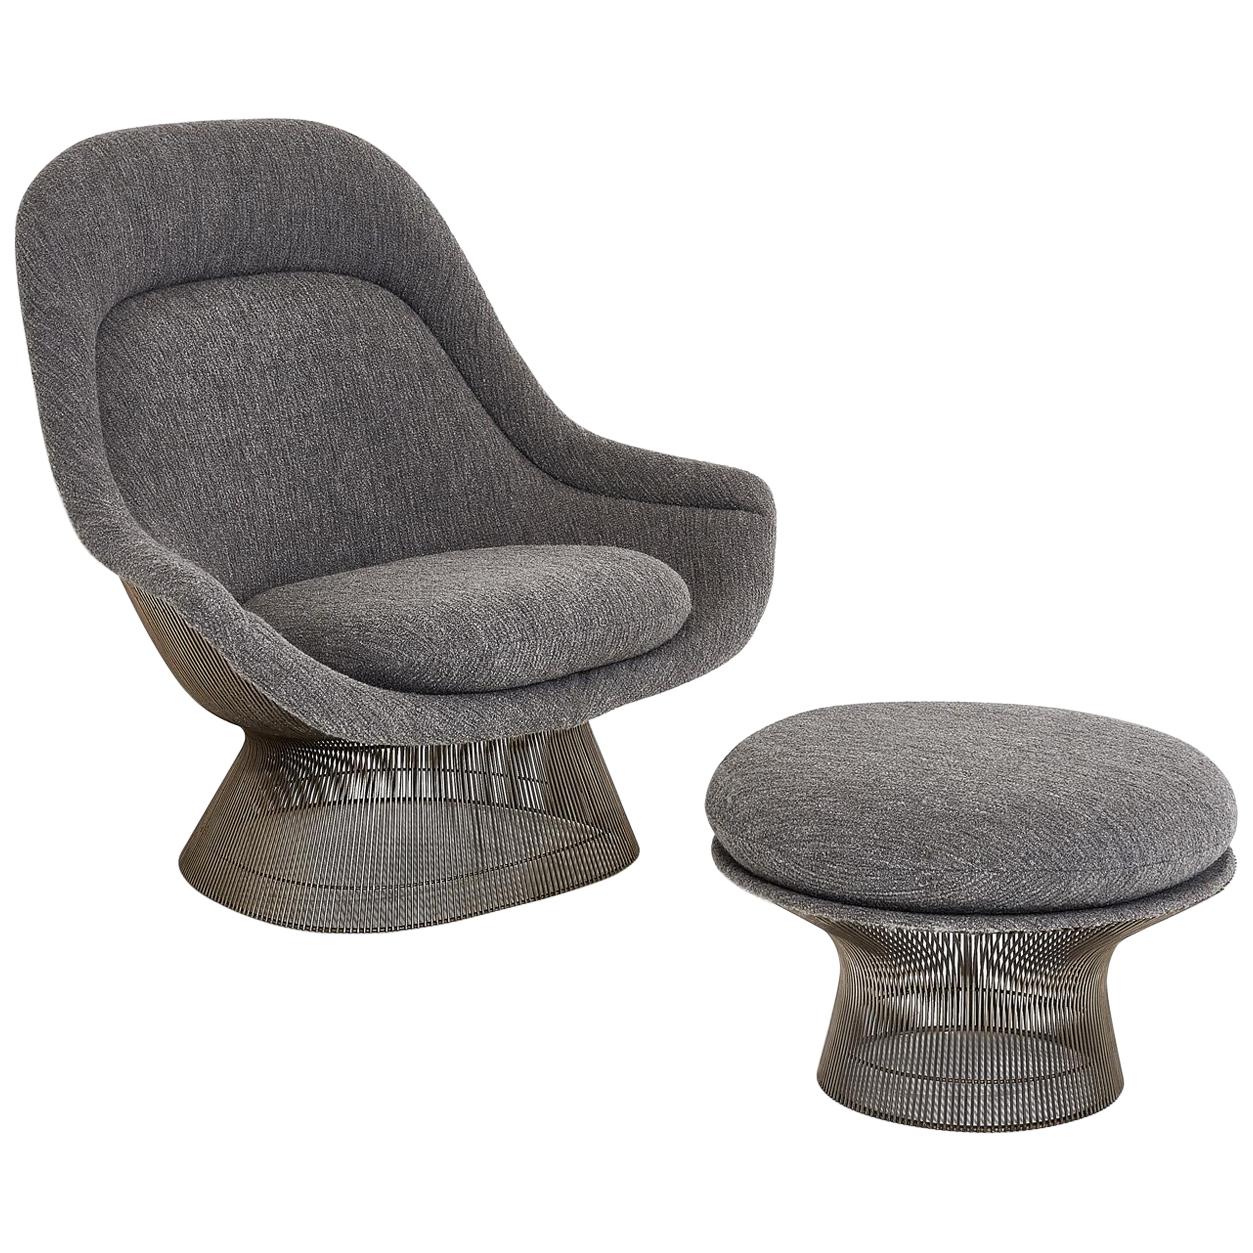 Warren Platner for Knoll Lounge Chair with Ottoman